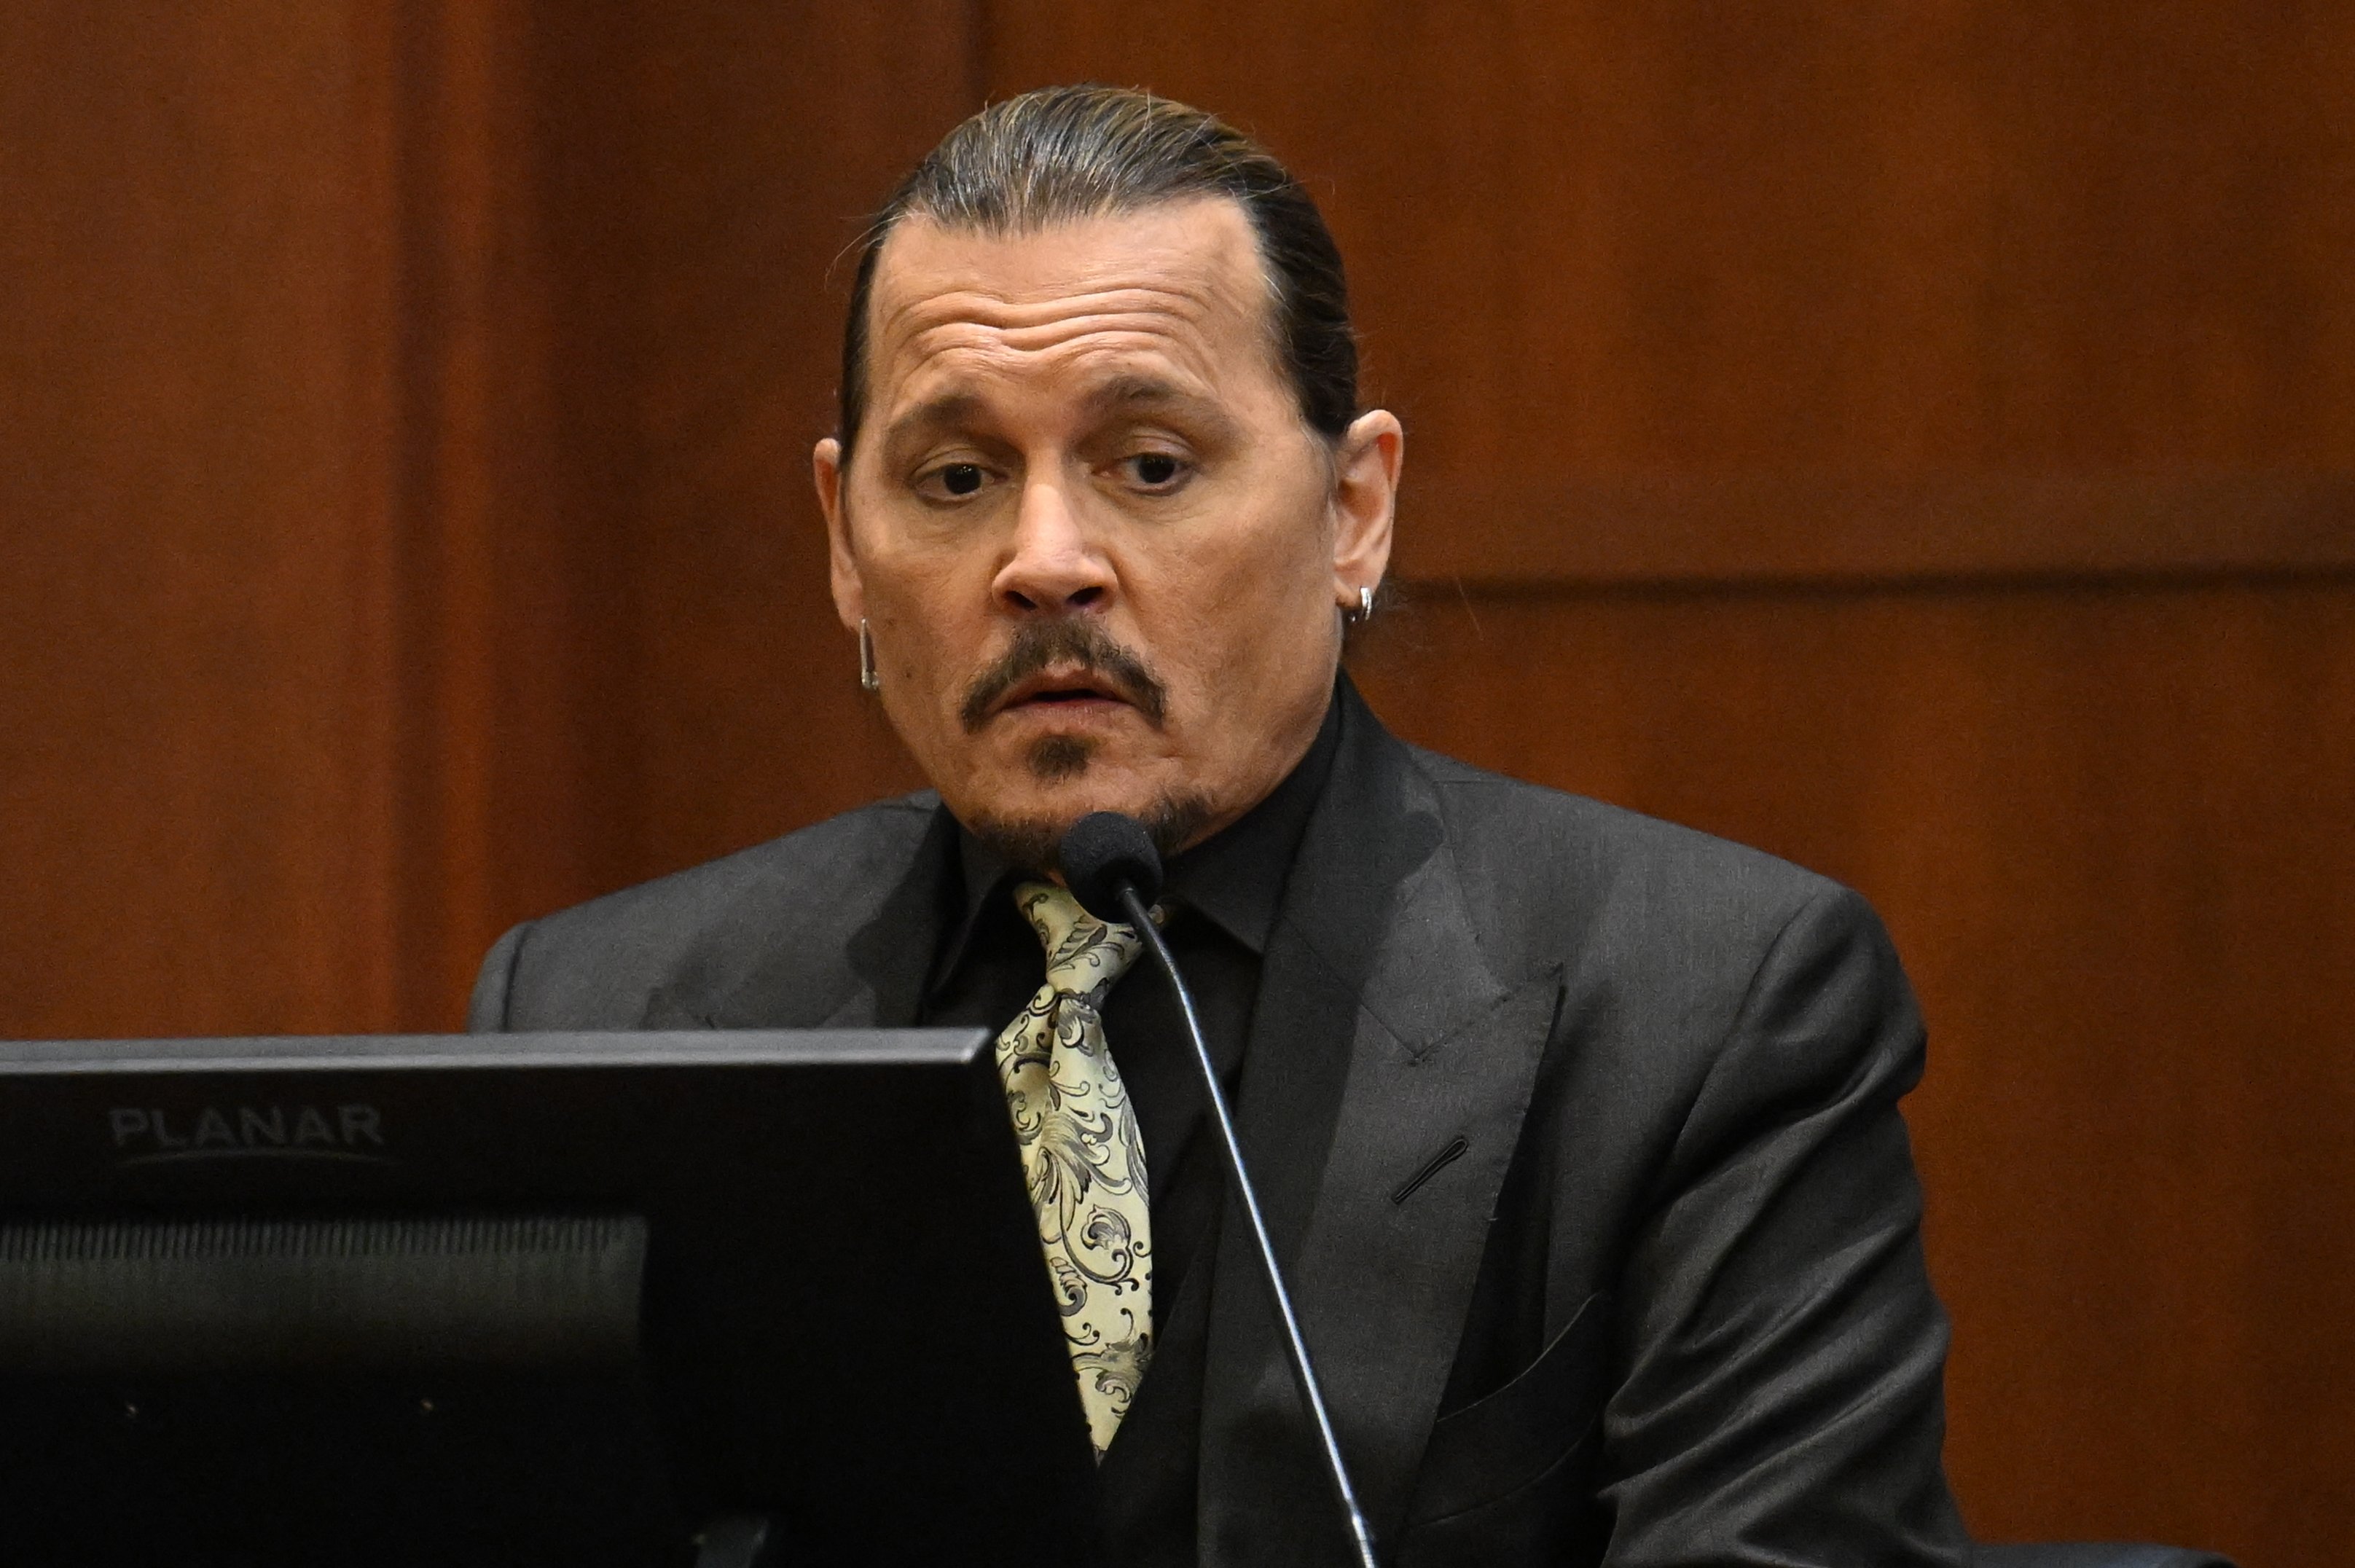 Johnny Depp testifies during his defamation trial in the Fairfax County Circuit Courthouse in Fairfax, Virginia, on April 19, 2022. | Source: Getty Images